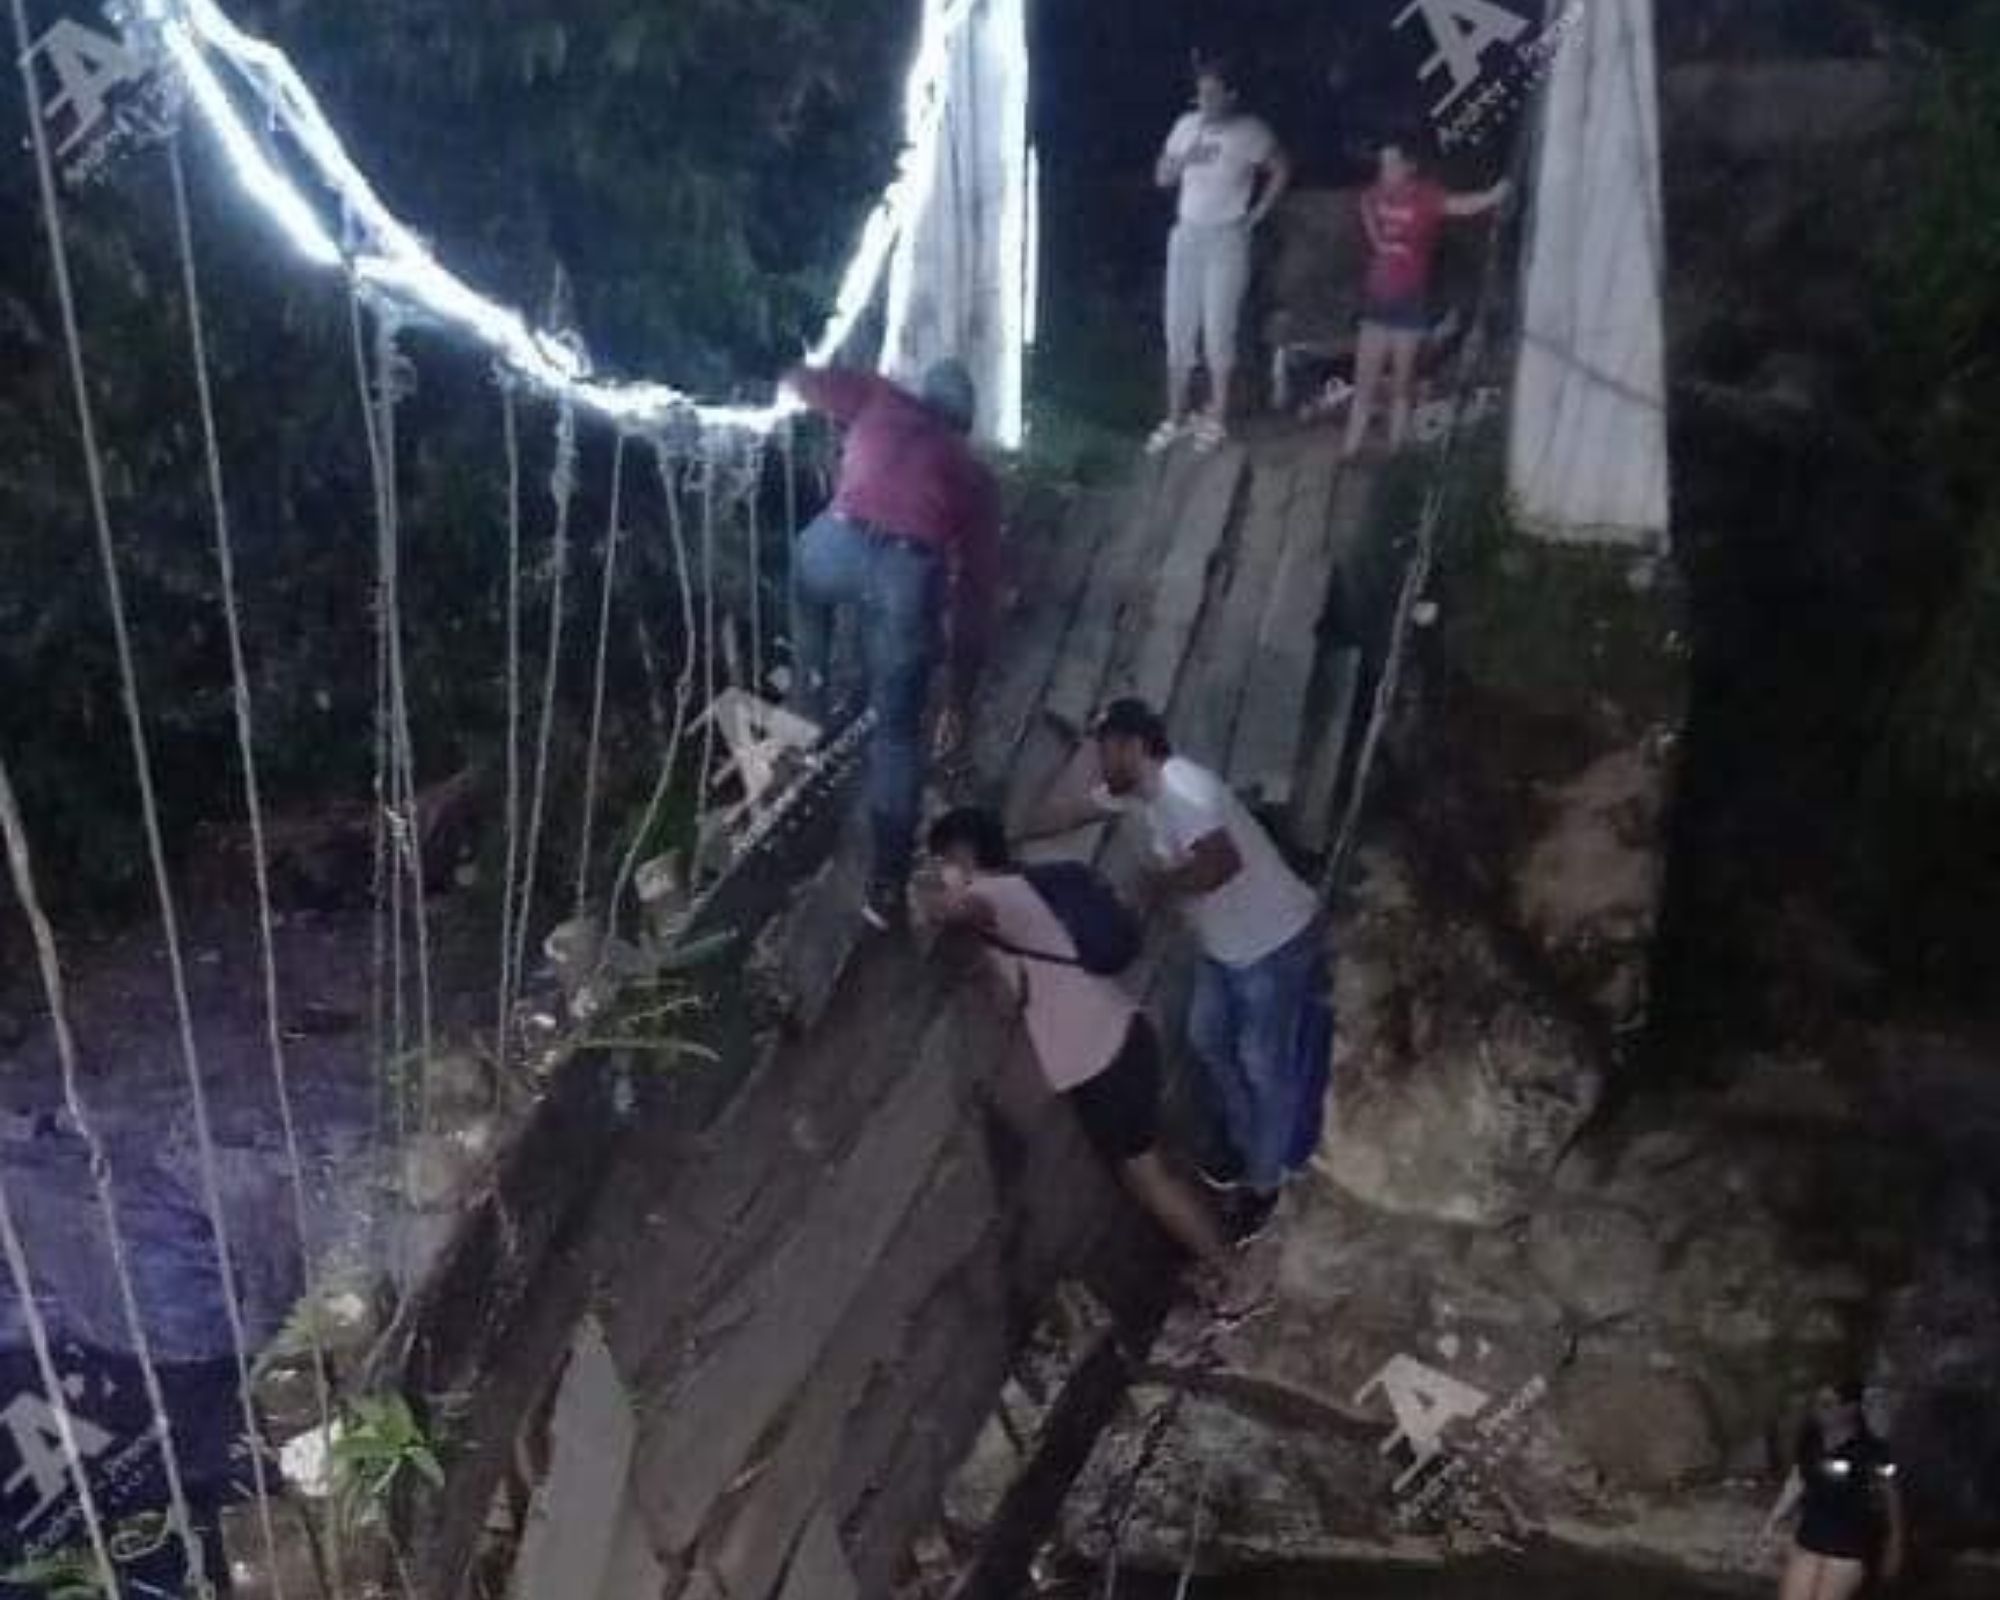 "Tragedy announced": While crossing the Las Pailas bridge in Caquetá, it collapsed